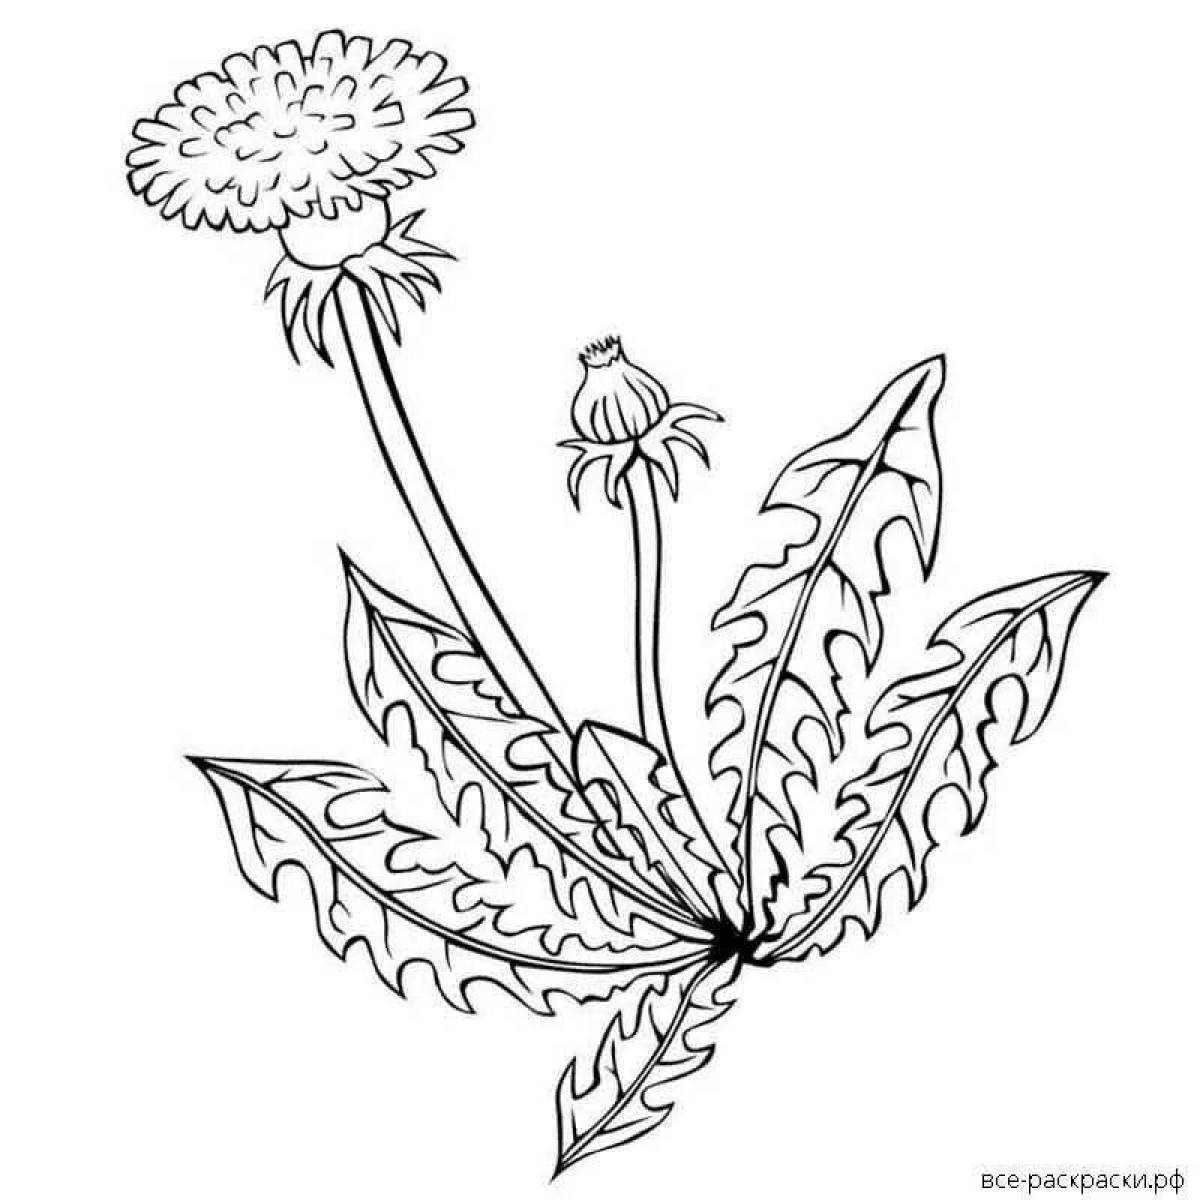 Bright dandelion coloring page for kids